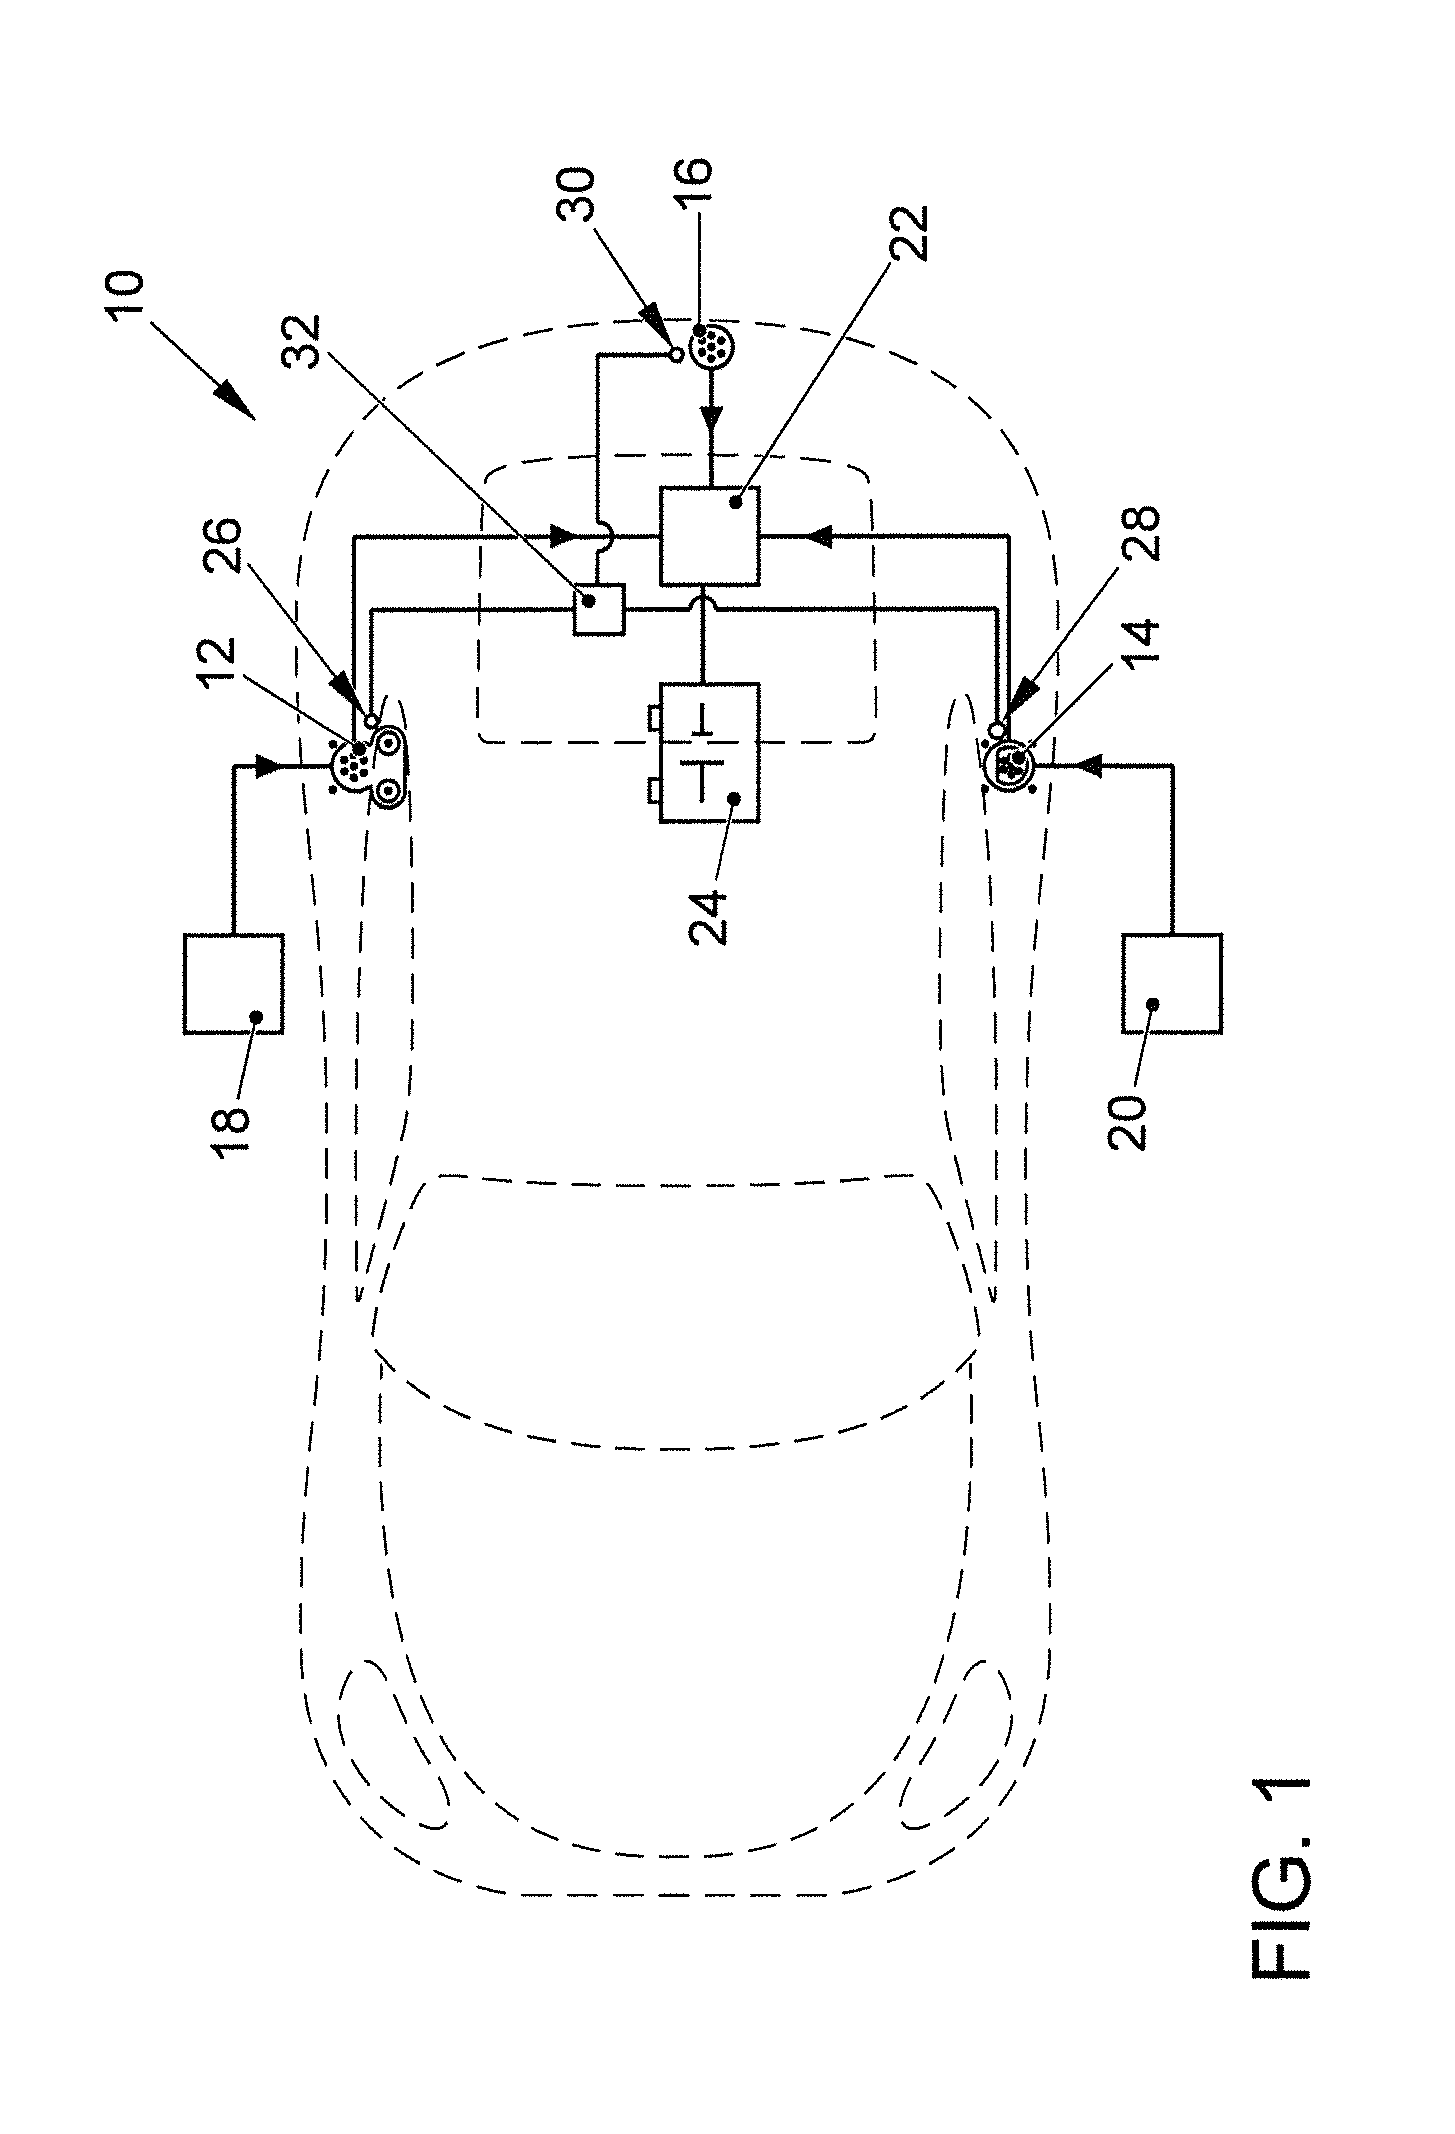 Charging apparatus for a motor vehicle